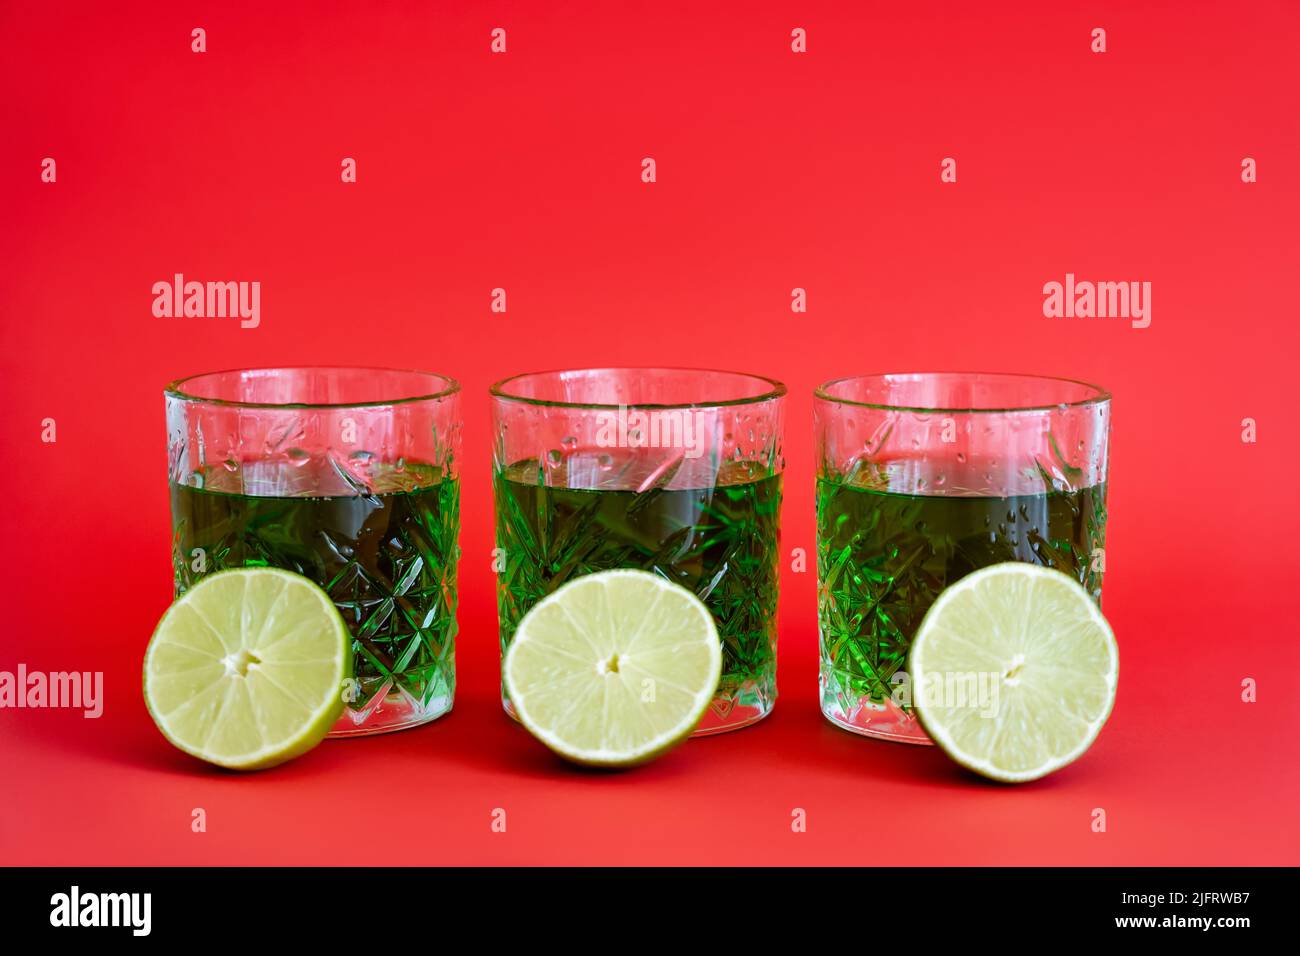 green alcohol drink in three faceted glasses with water drops and halves of limes on red Stock Photo